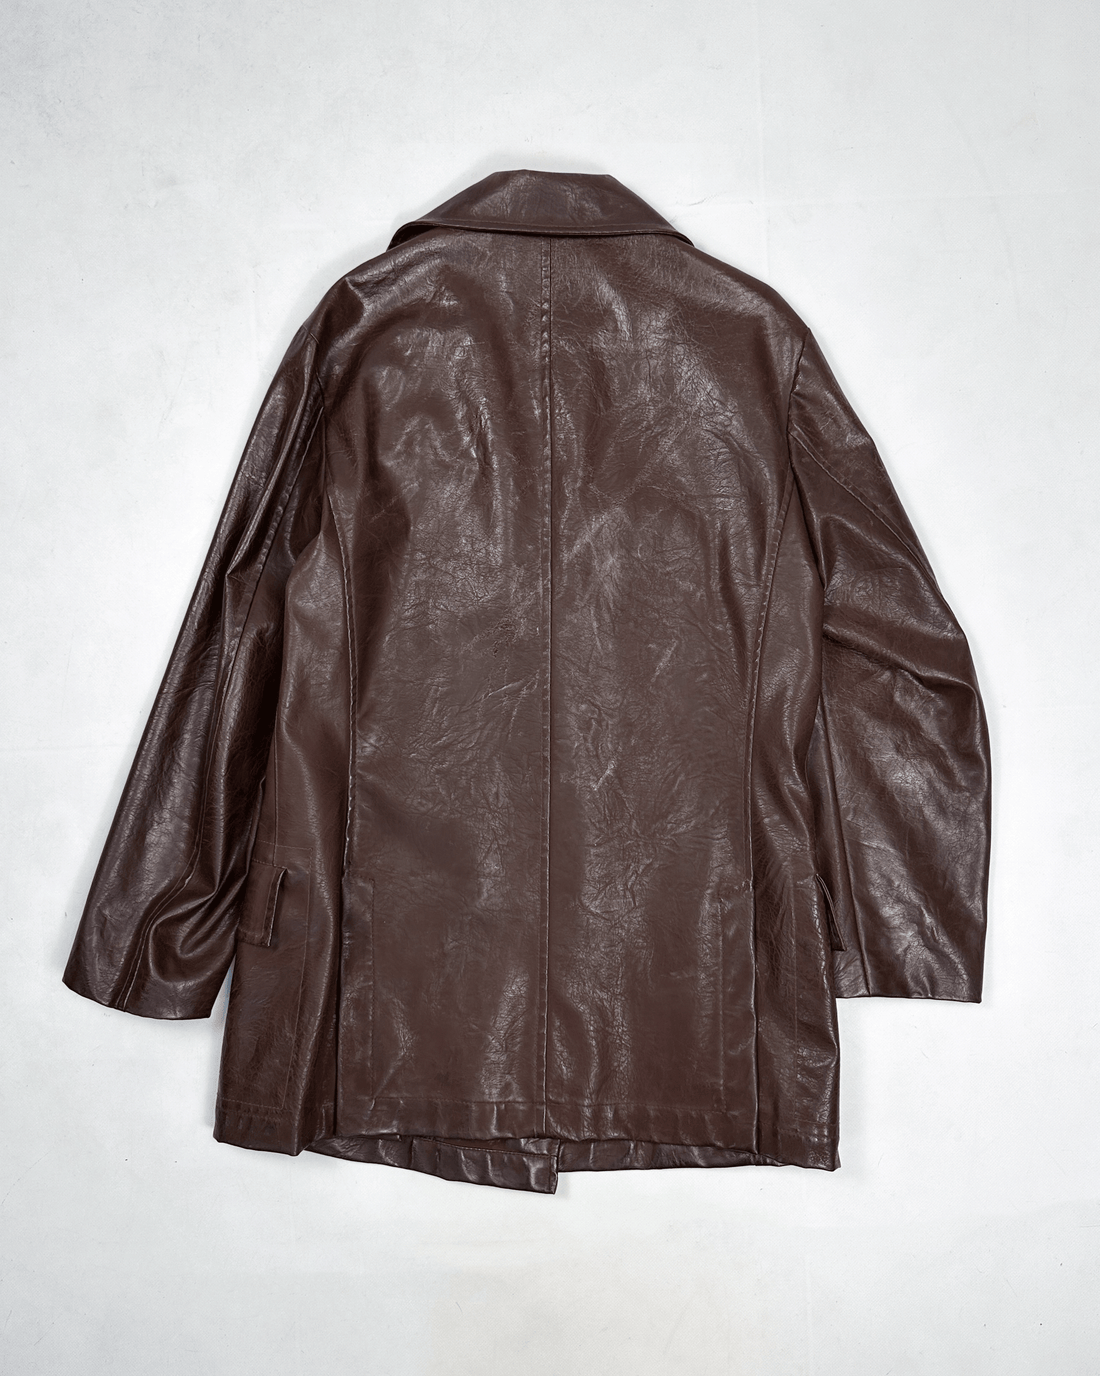 Marithé Francois Girbaud Synthetic Leather Brown Jacket 1990's